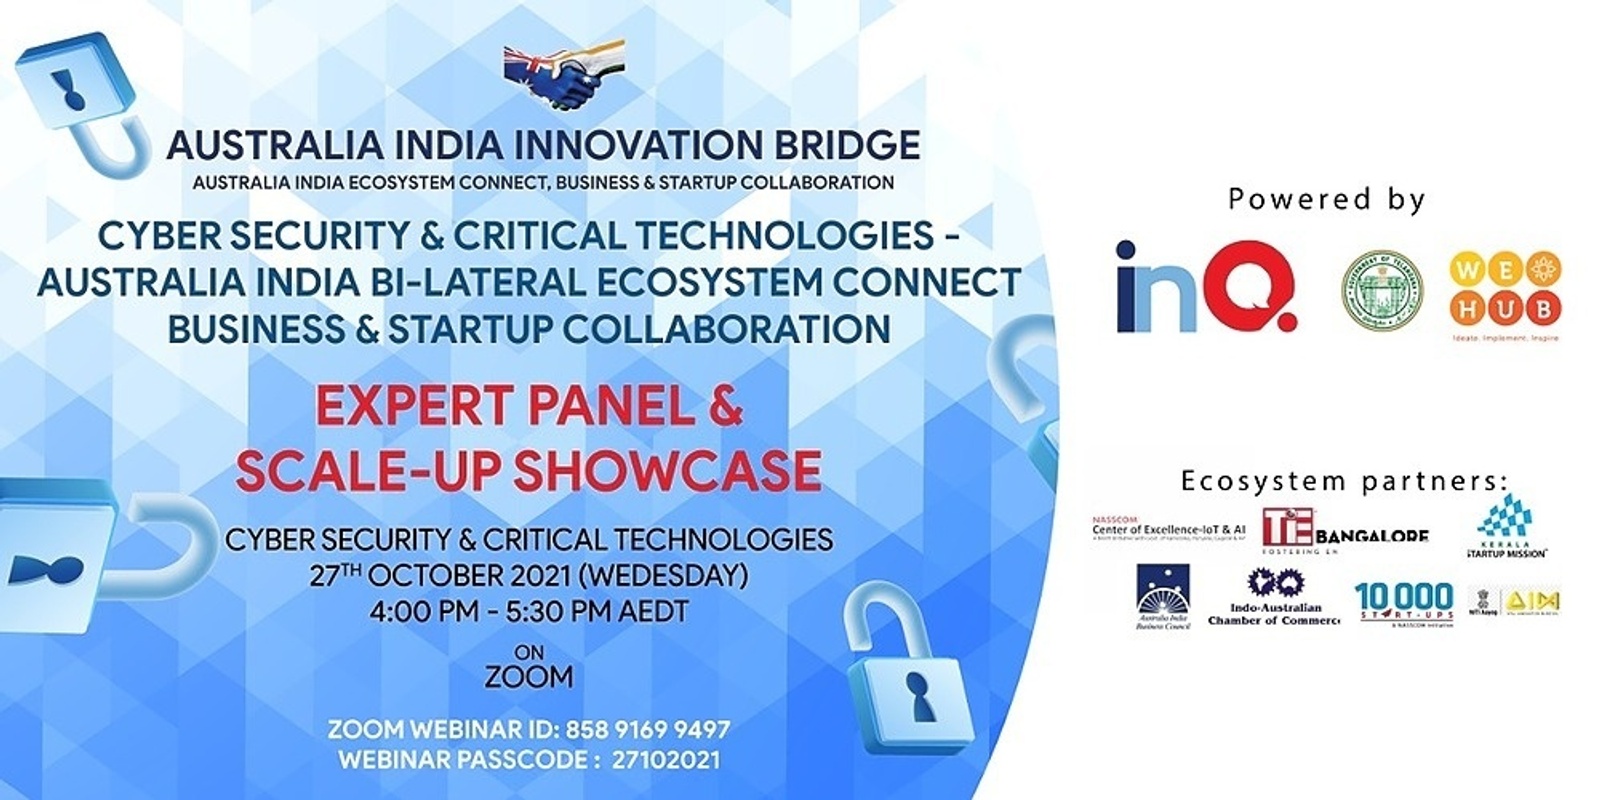 Banner image for Cyber Security & Critical Technologies - Australia India Bi-Lateral Ecosystem Connect , Business & Startup Collaboration Opportunities